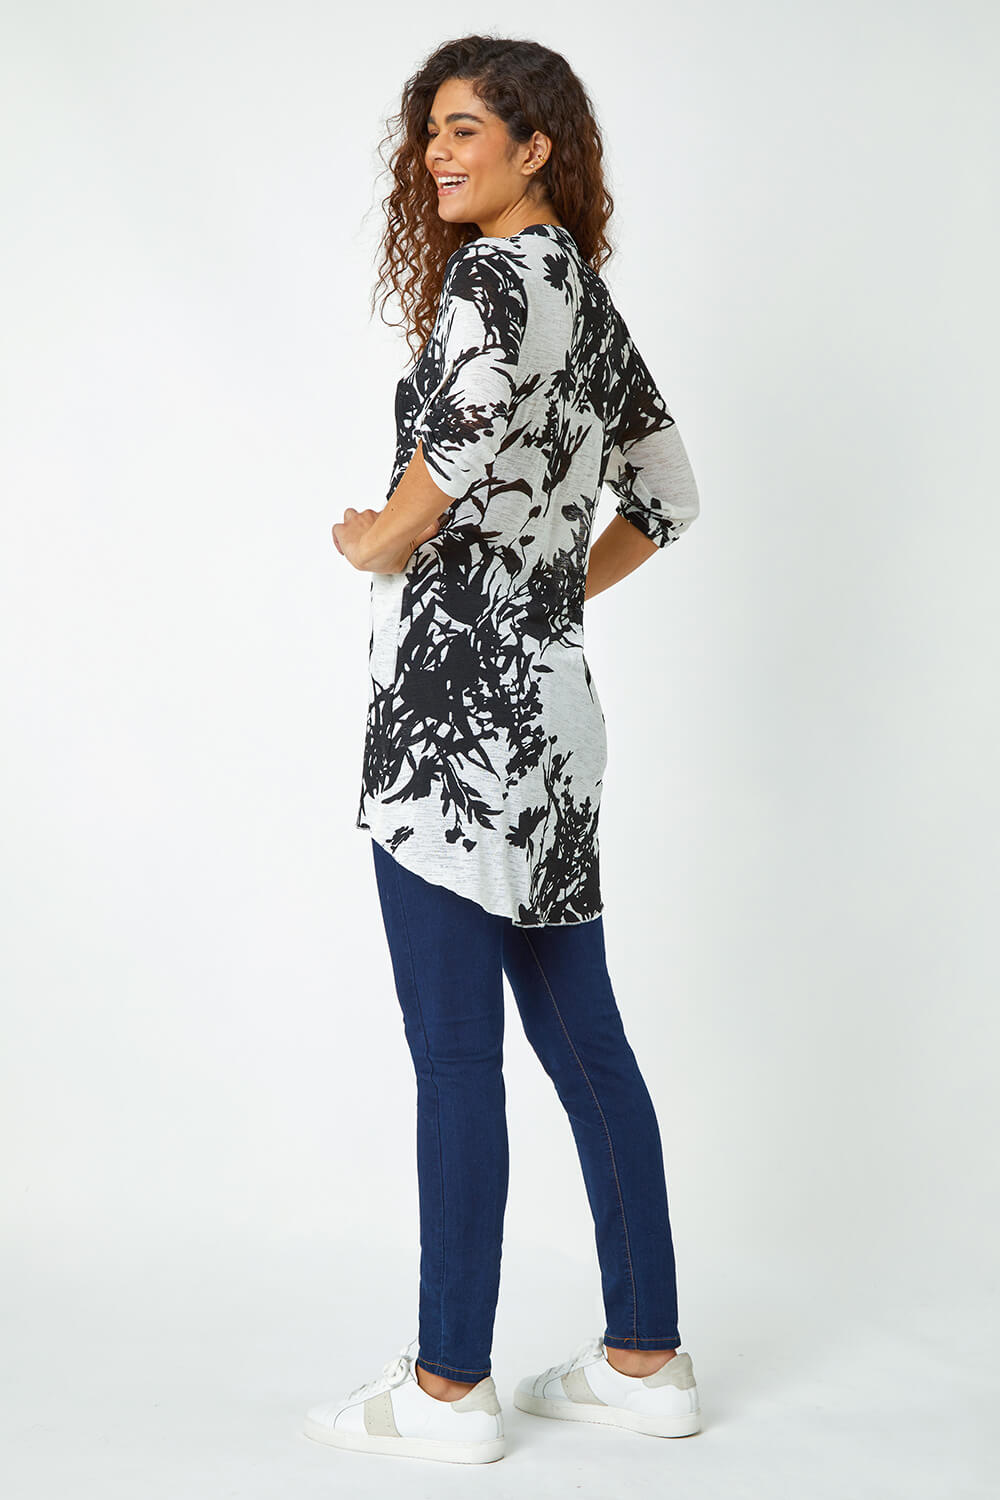 Ivory  Floral Print Longline Stretch Top, Image 3 of 5